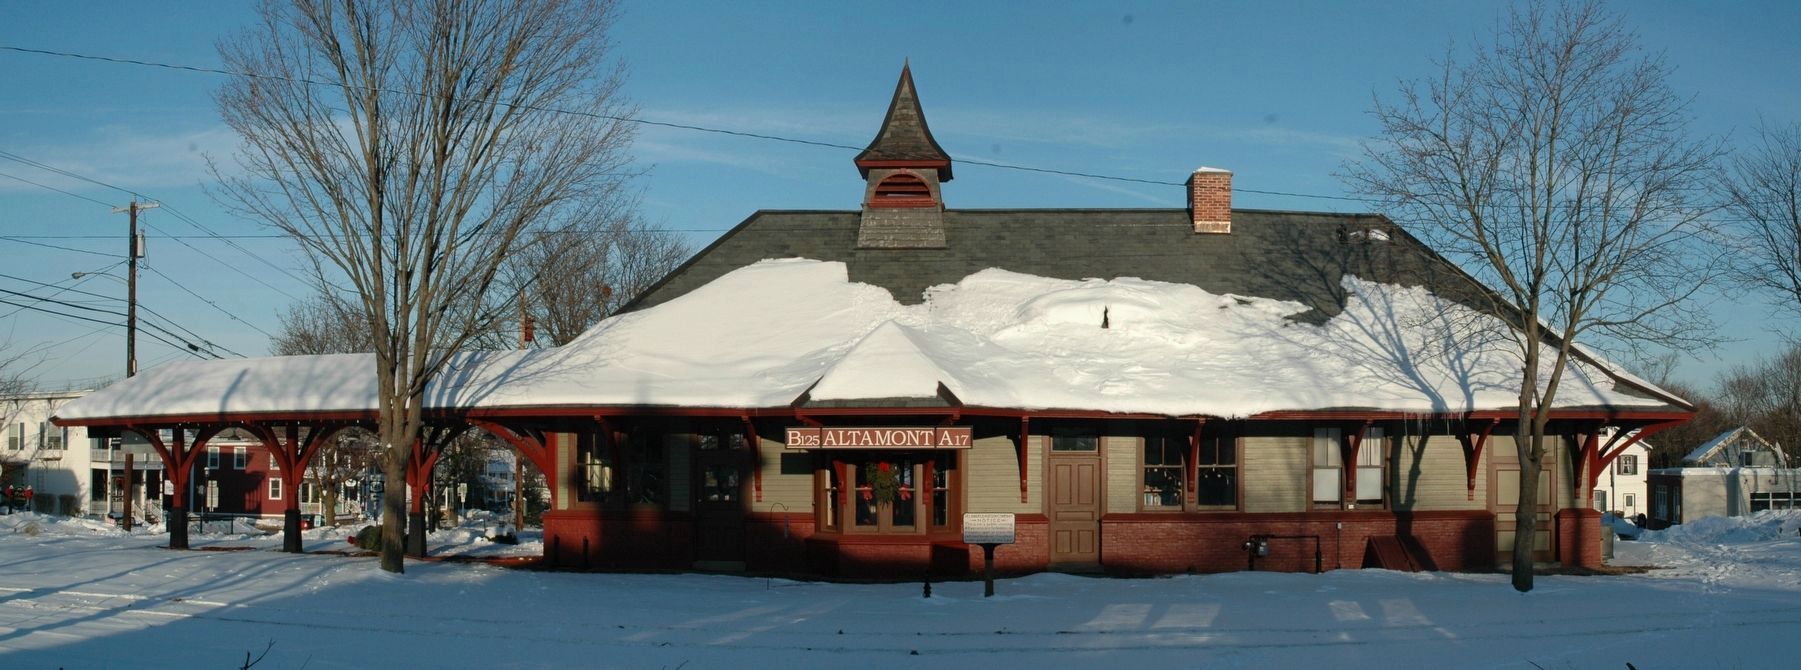 Altamont Free Library Located in the Former D&H Passenger Station image. Click for full size.